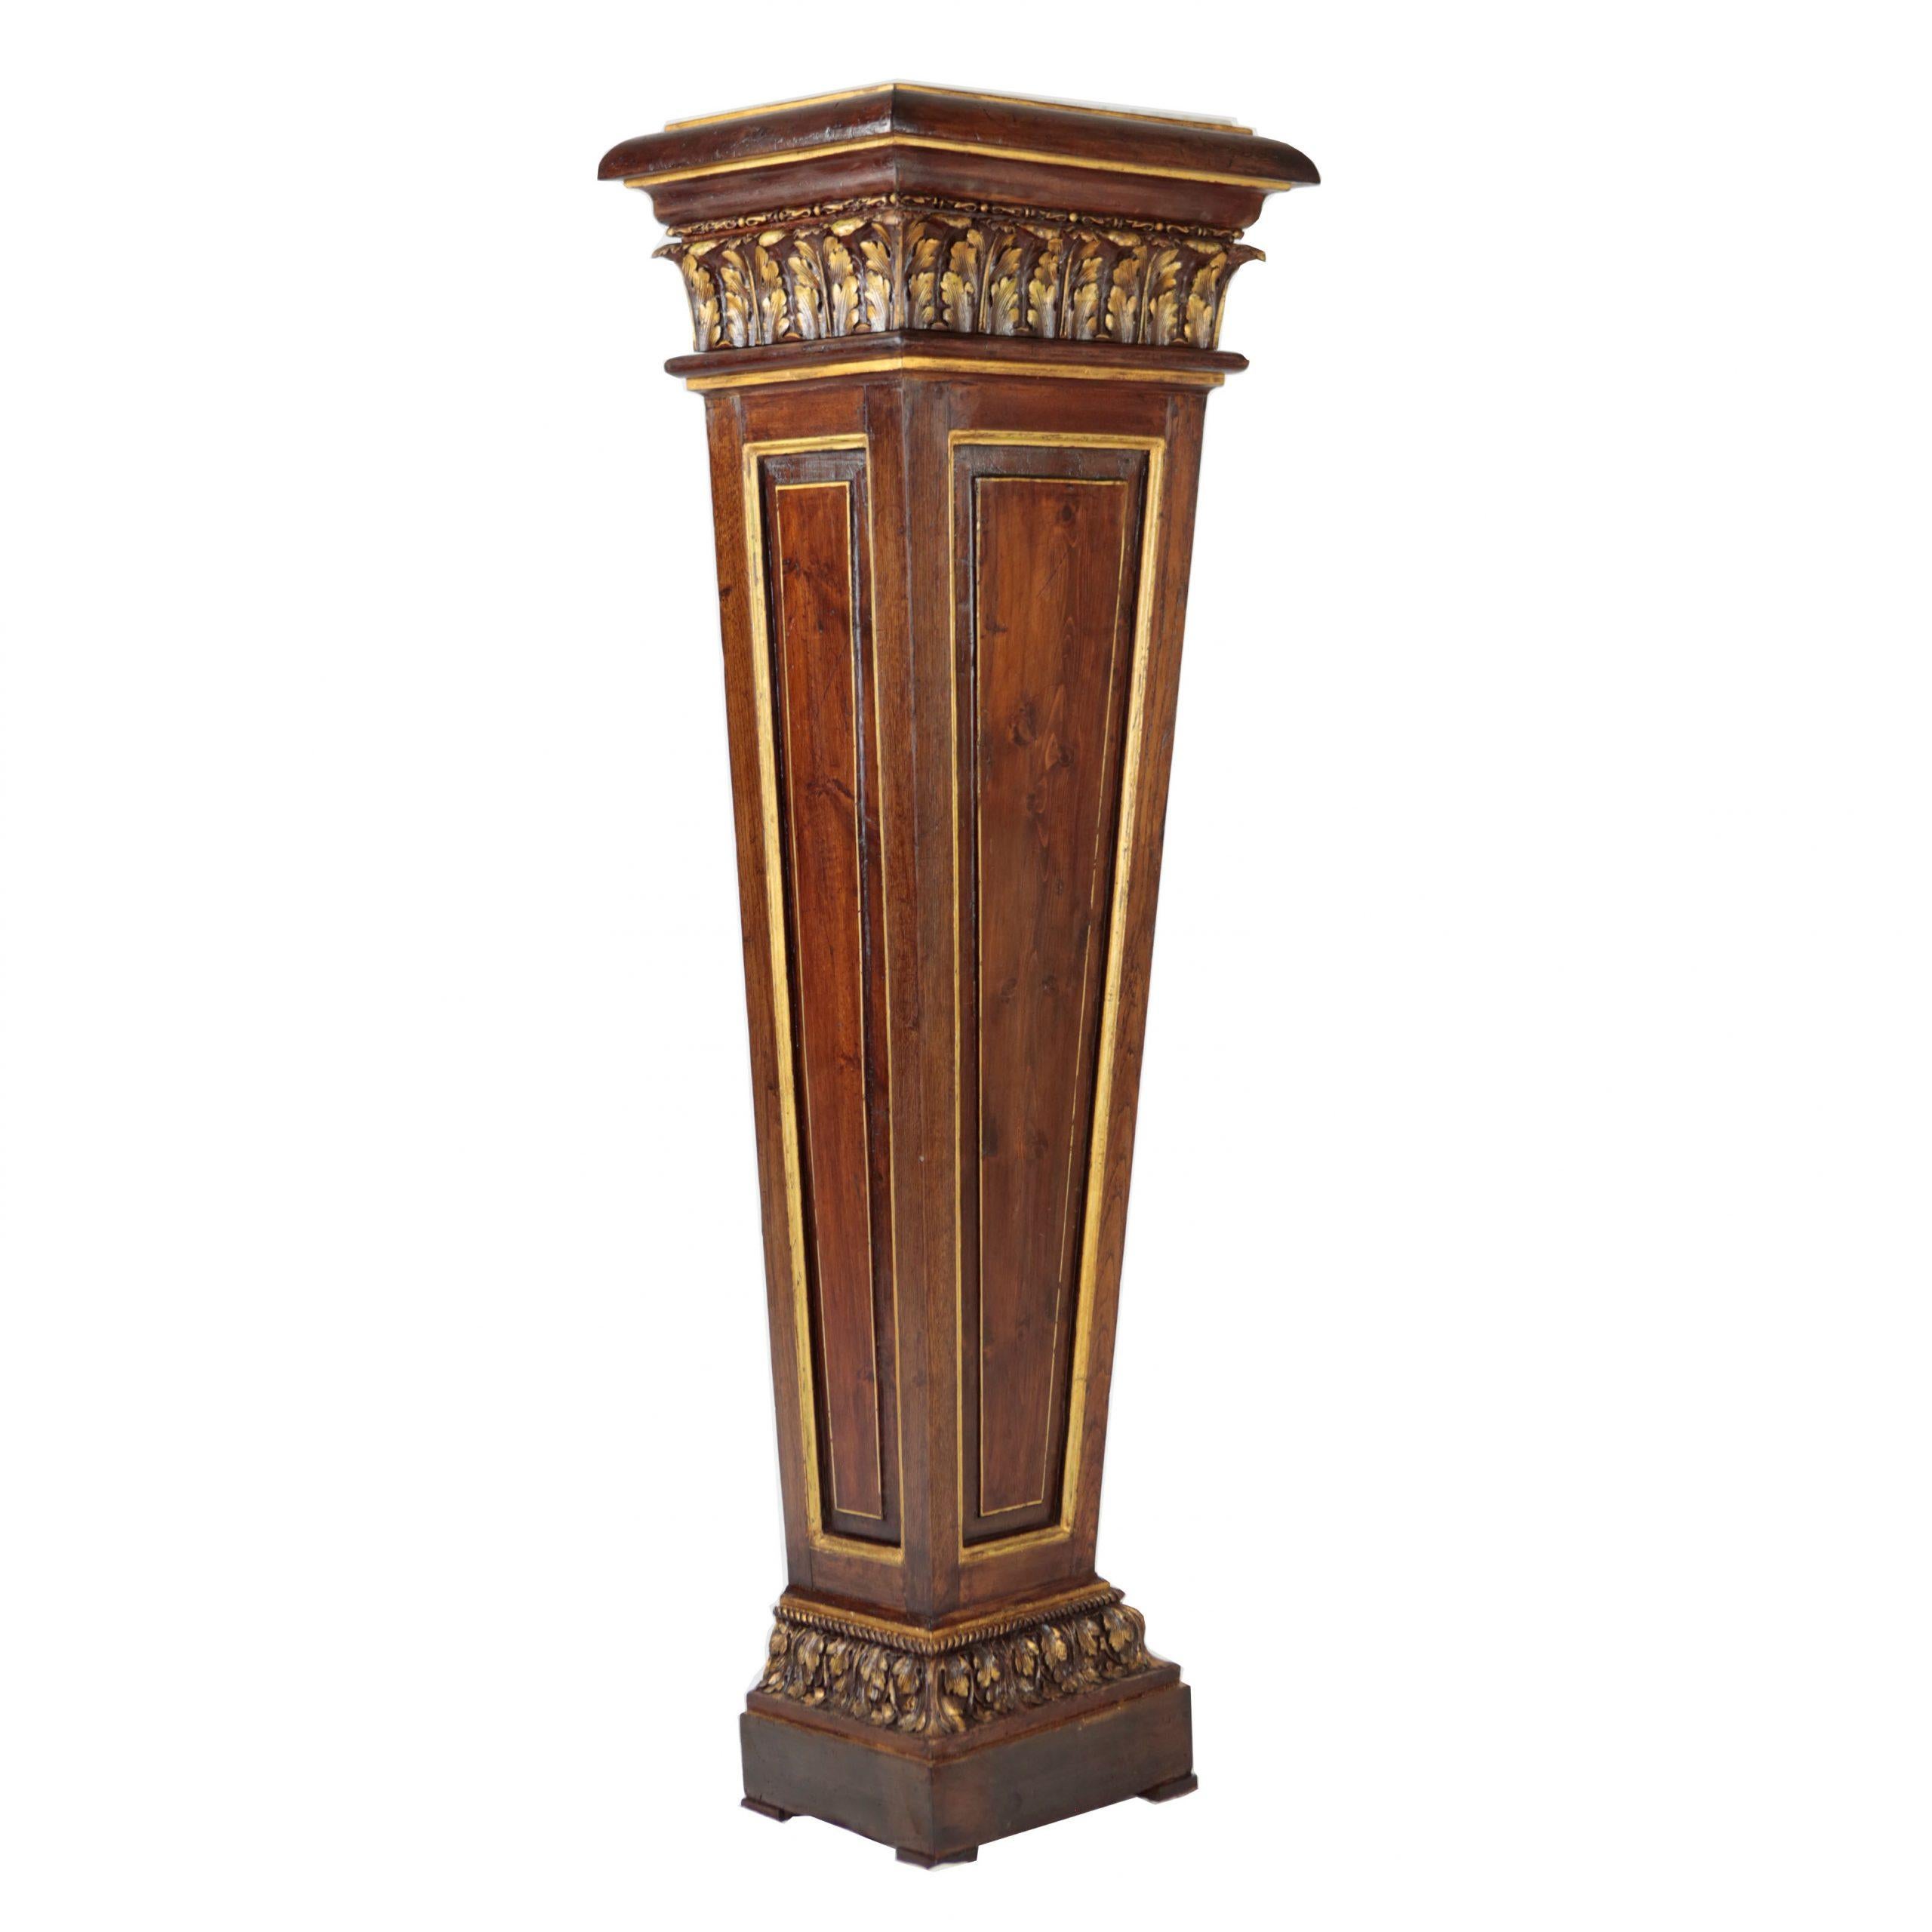 Pedestal, 2nd half 19th century, walnut, dark stained, carved, partially gilded, finished with marble top, restored condition, shellac wax polish

Height: 149 cm, width 50.5 cm, depth 39 cm